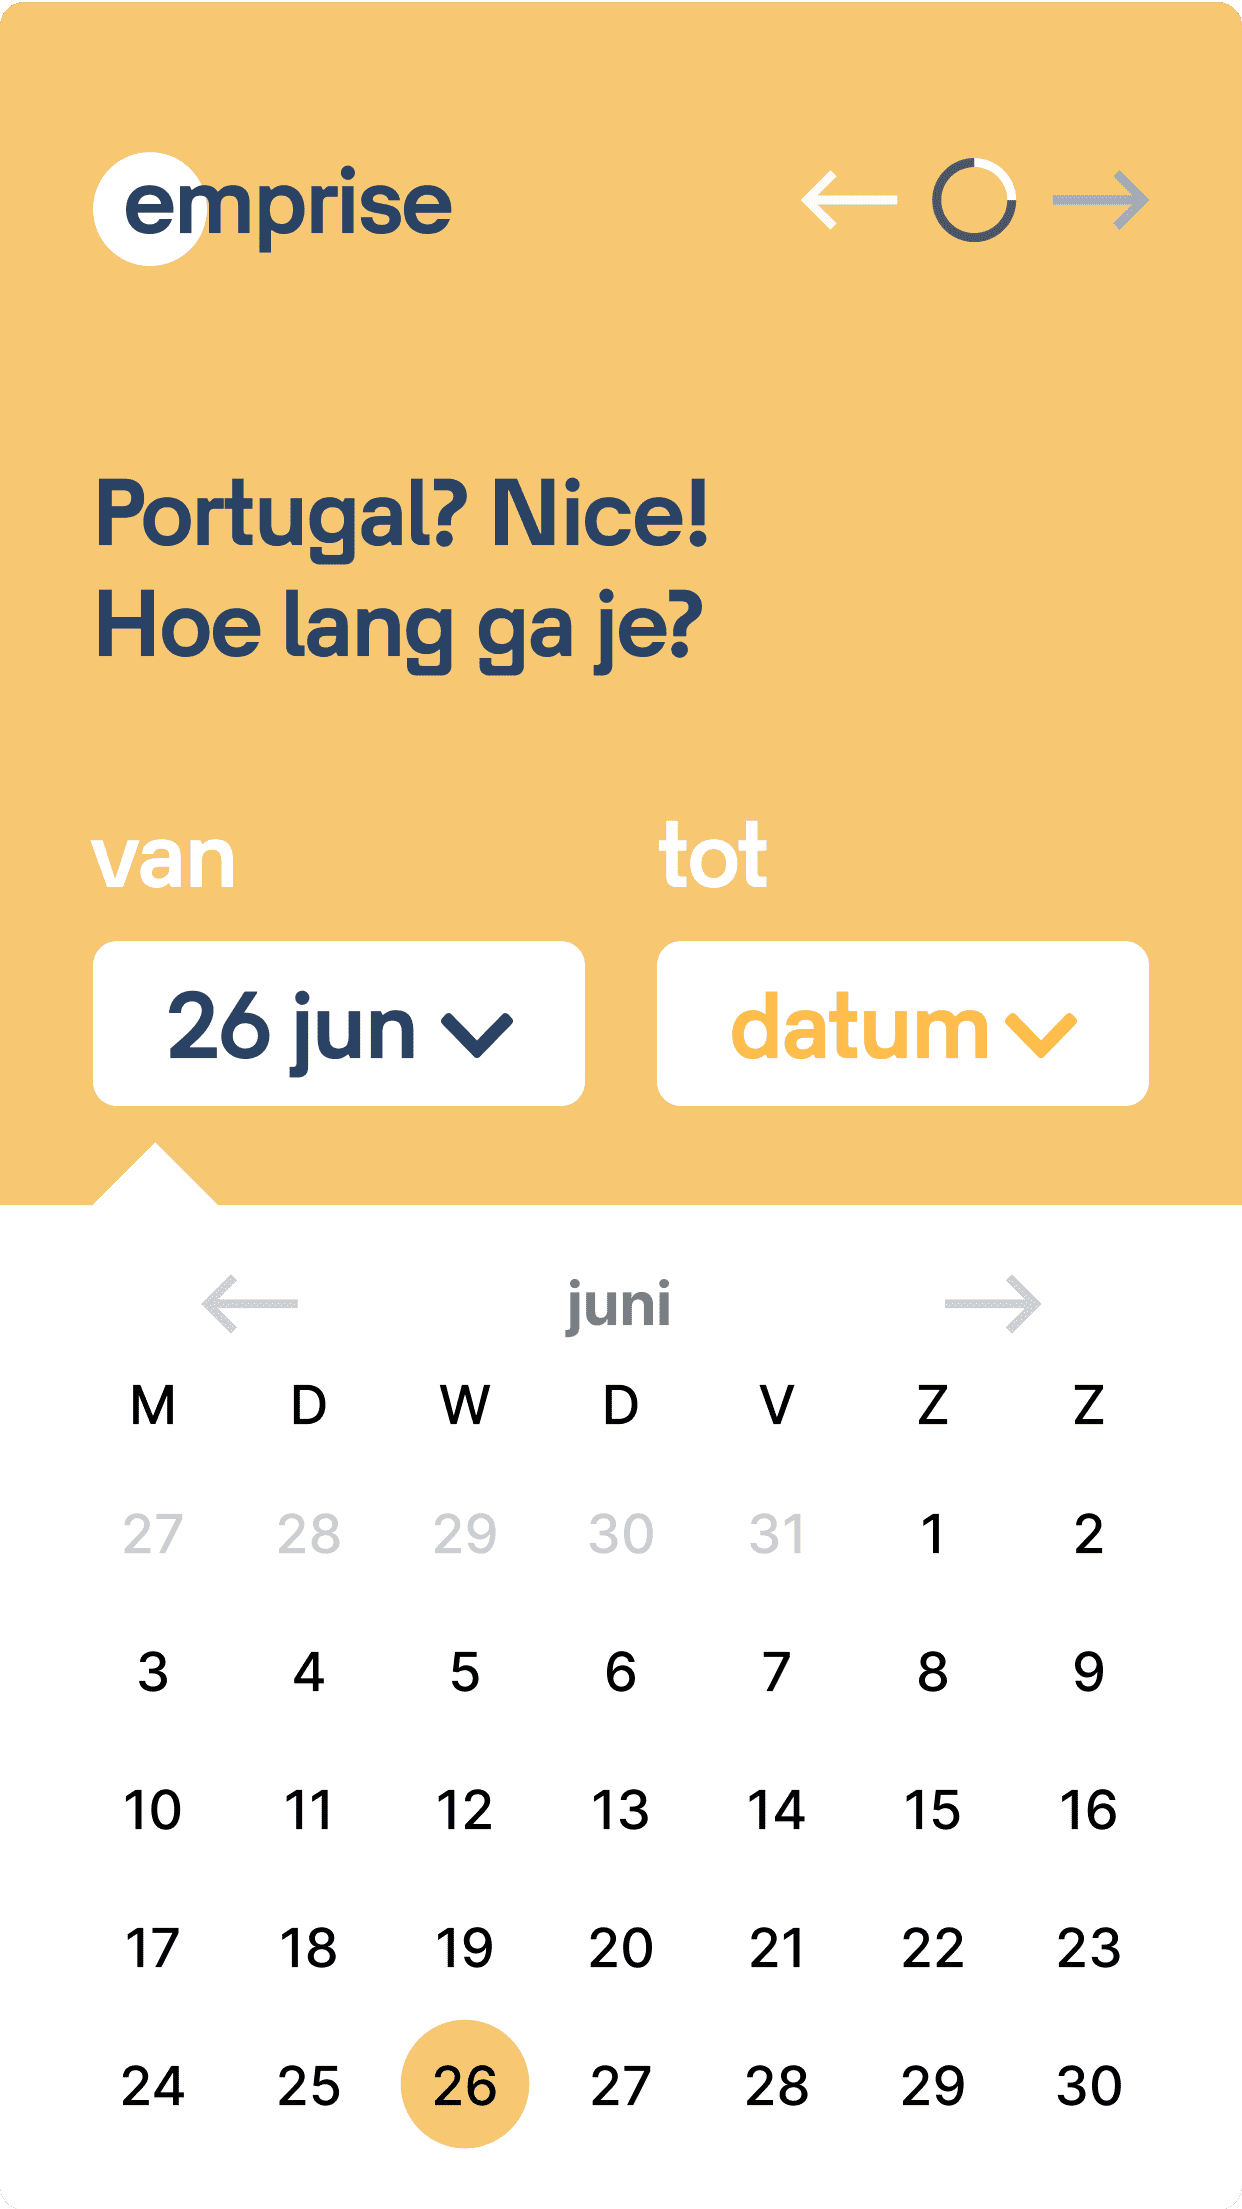 A date picker to set the duration of your trip.